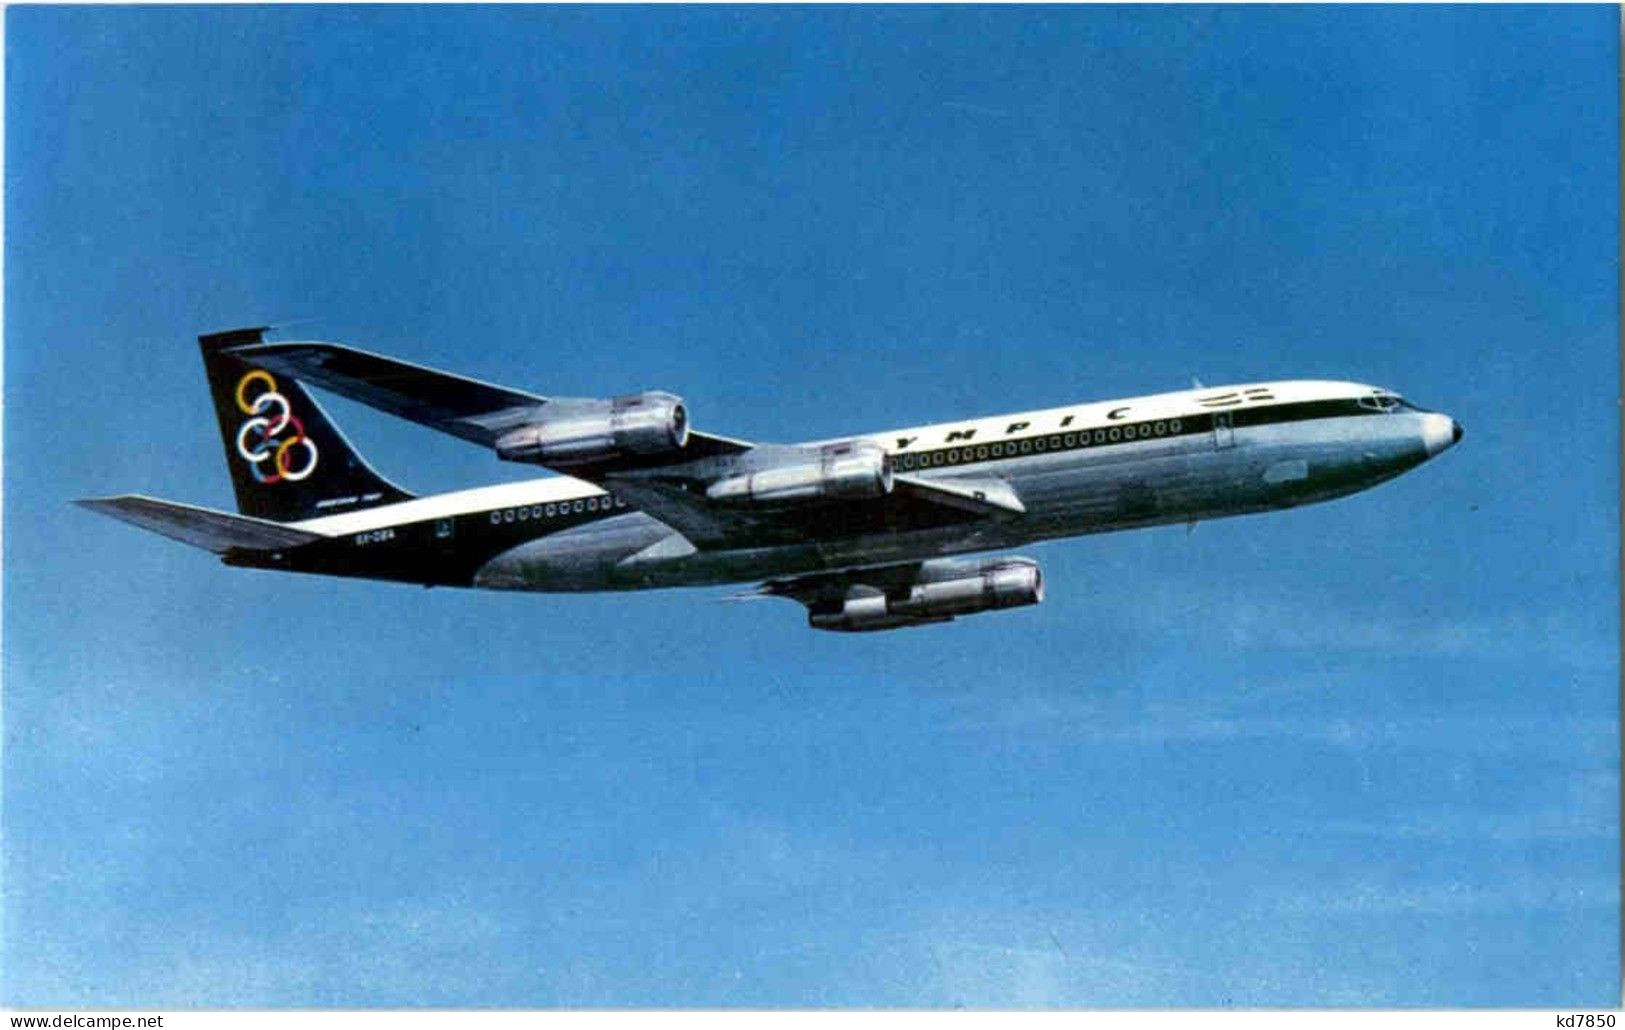 Olympic - Boeing 707 - 1946-....: Ere Moderne